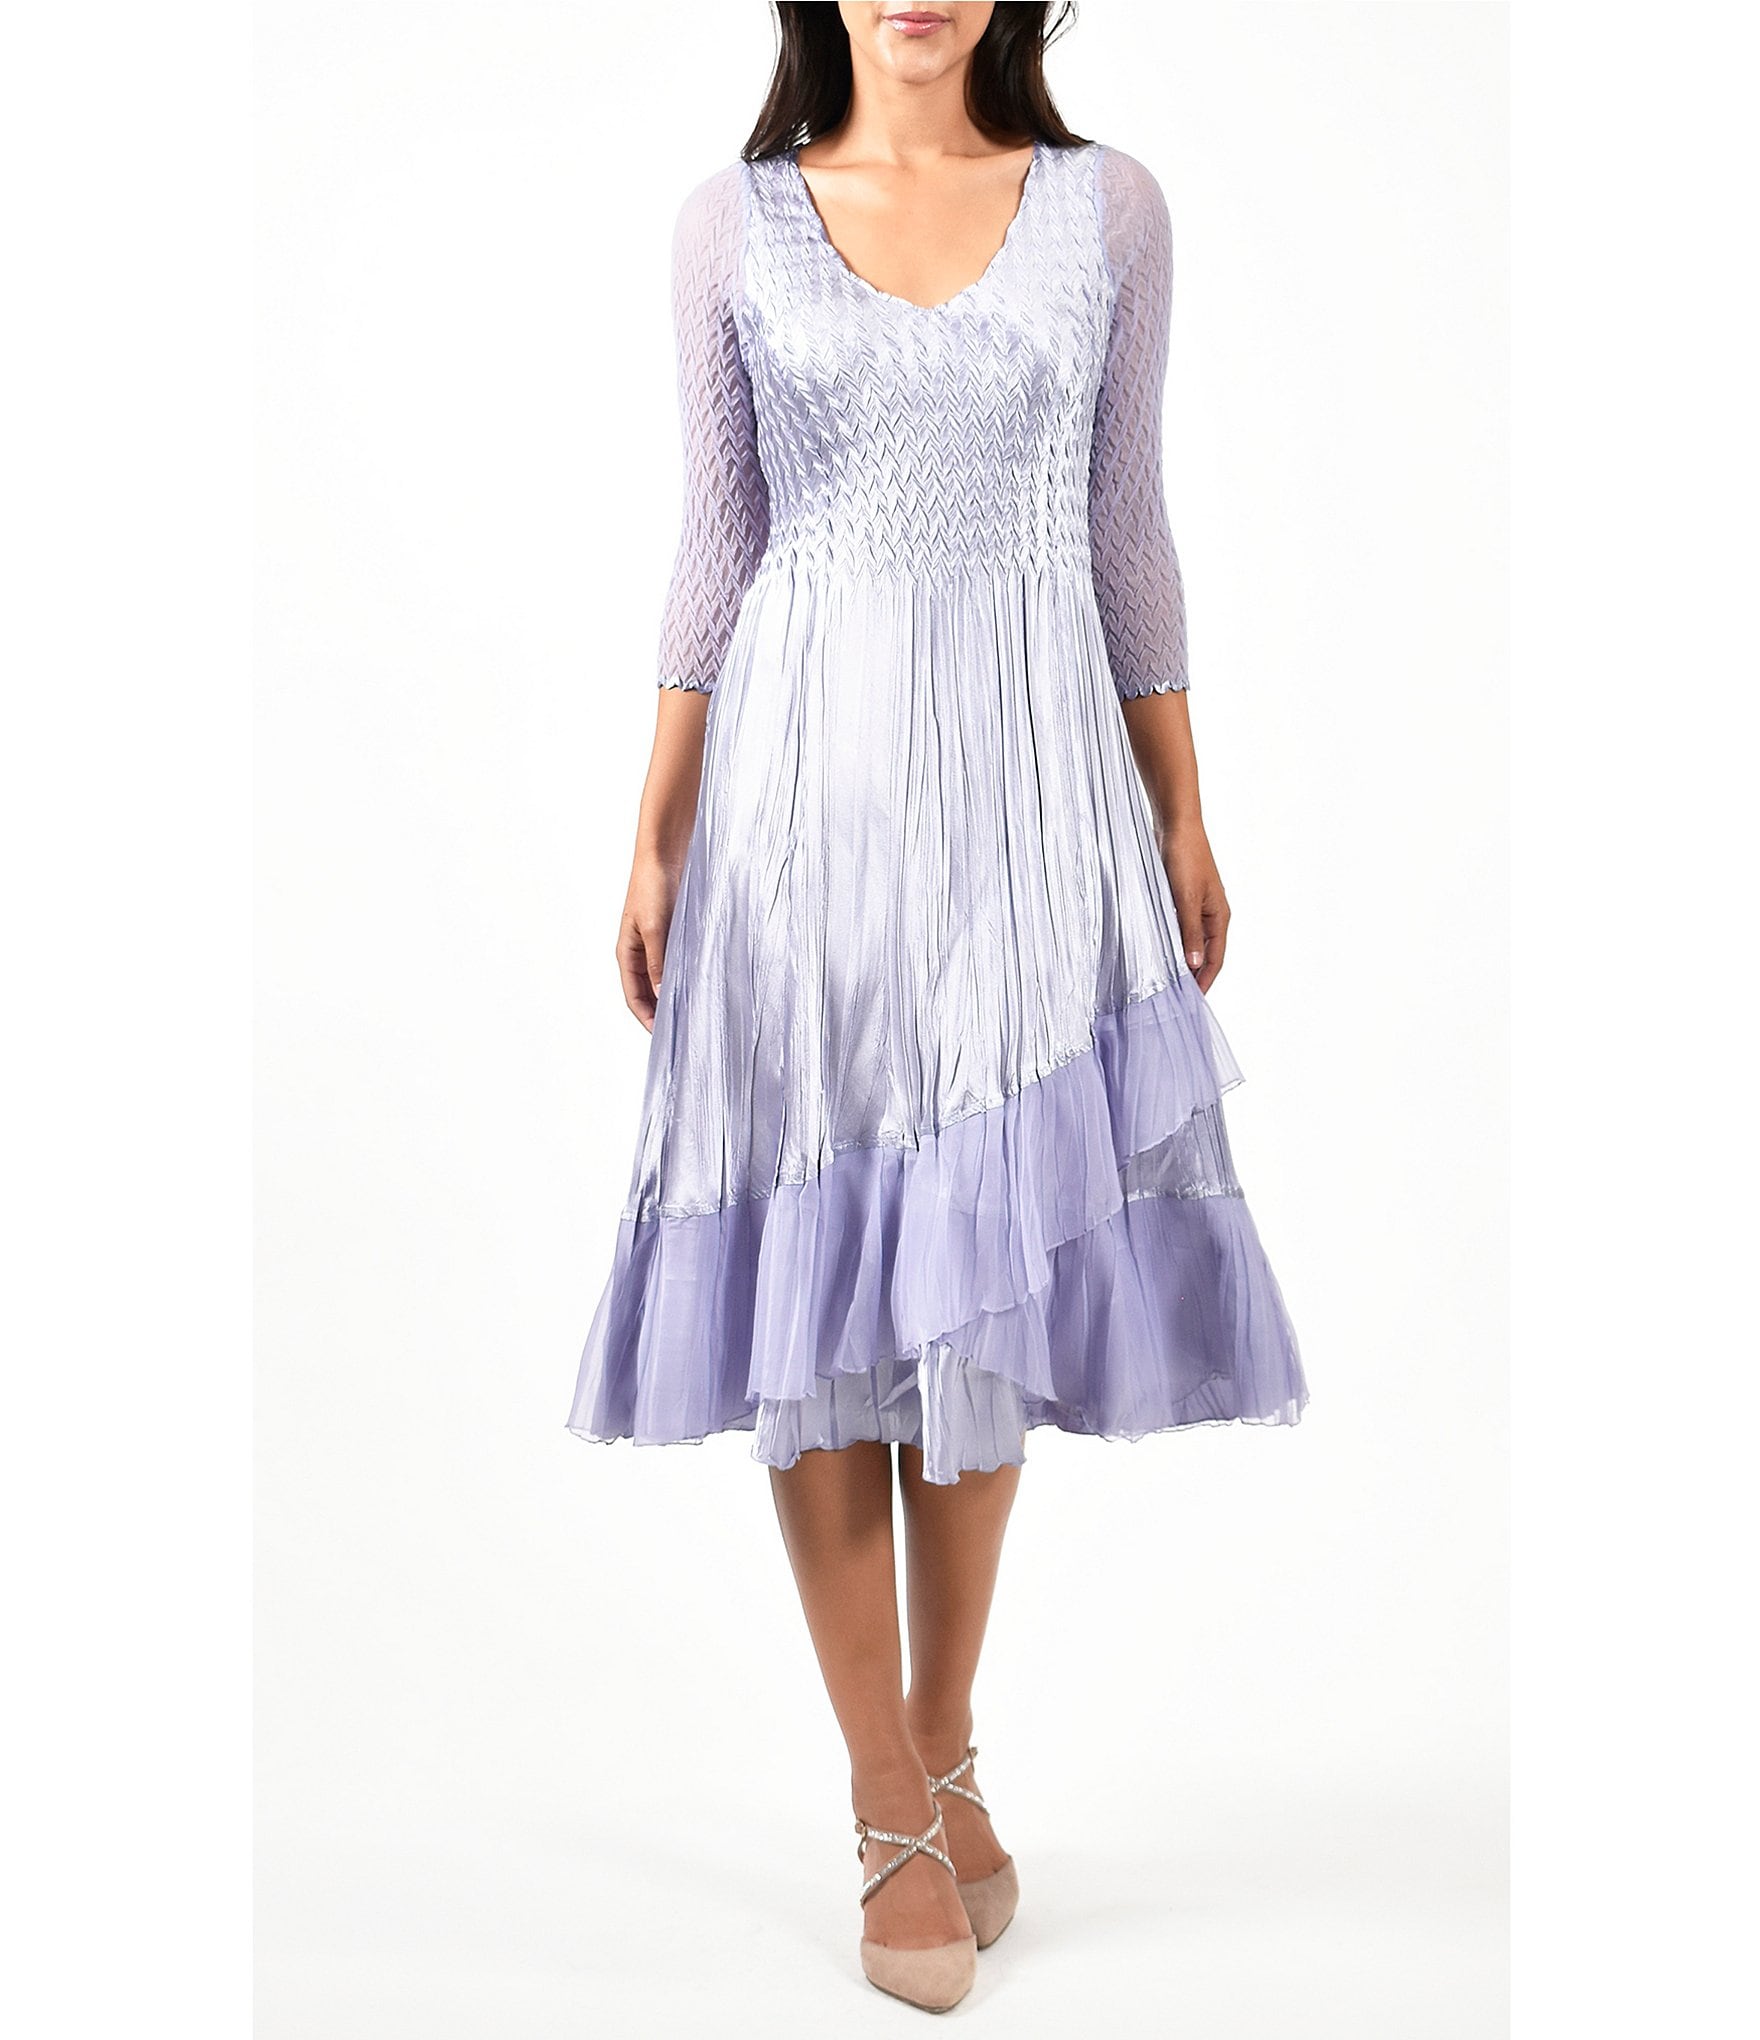 pleated: Women's Cocktail & Party Dresses | Dillard's